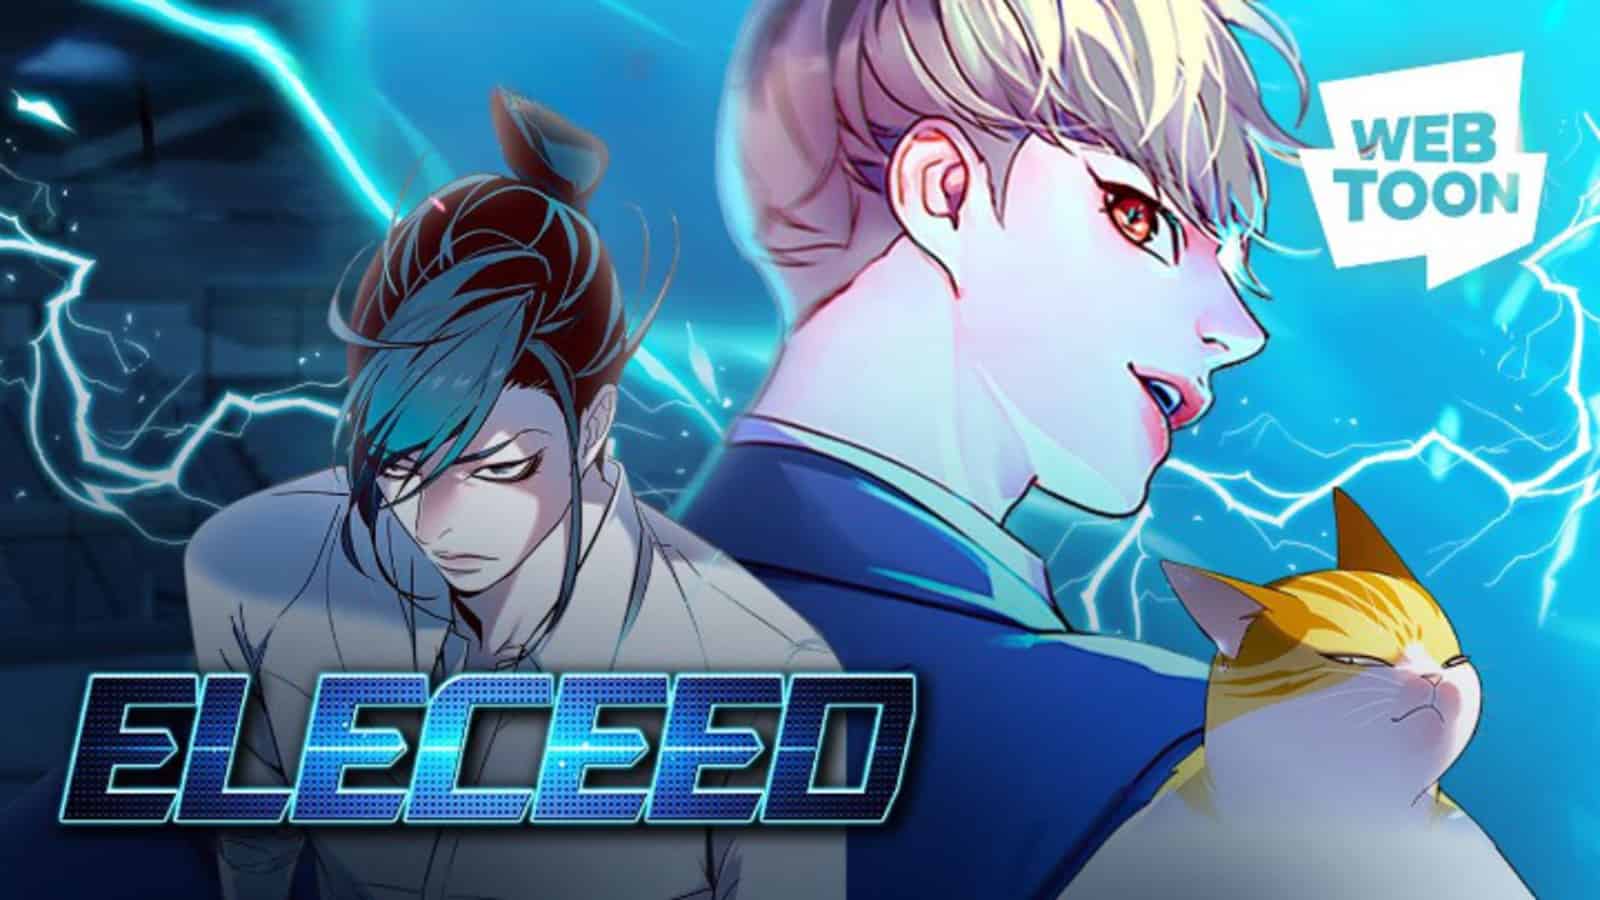 Eleceed Cover